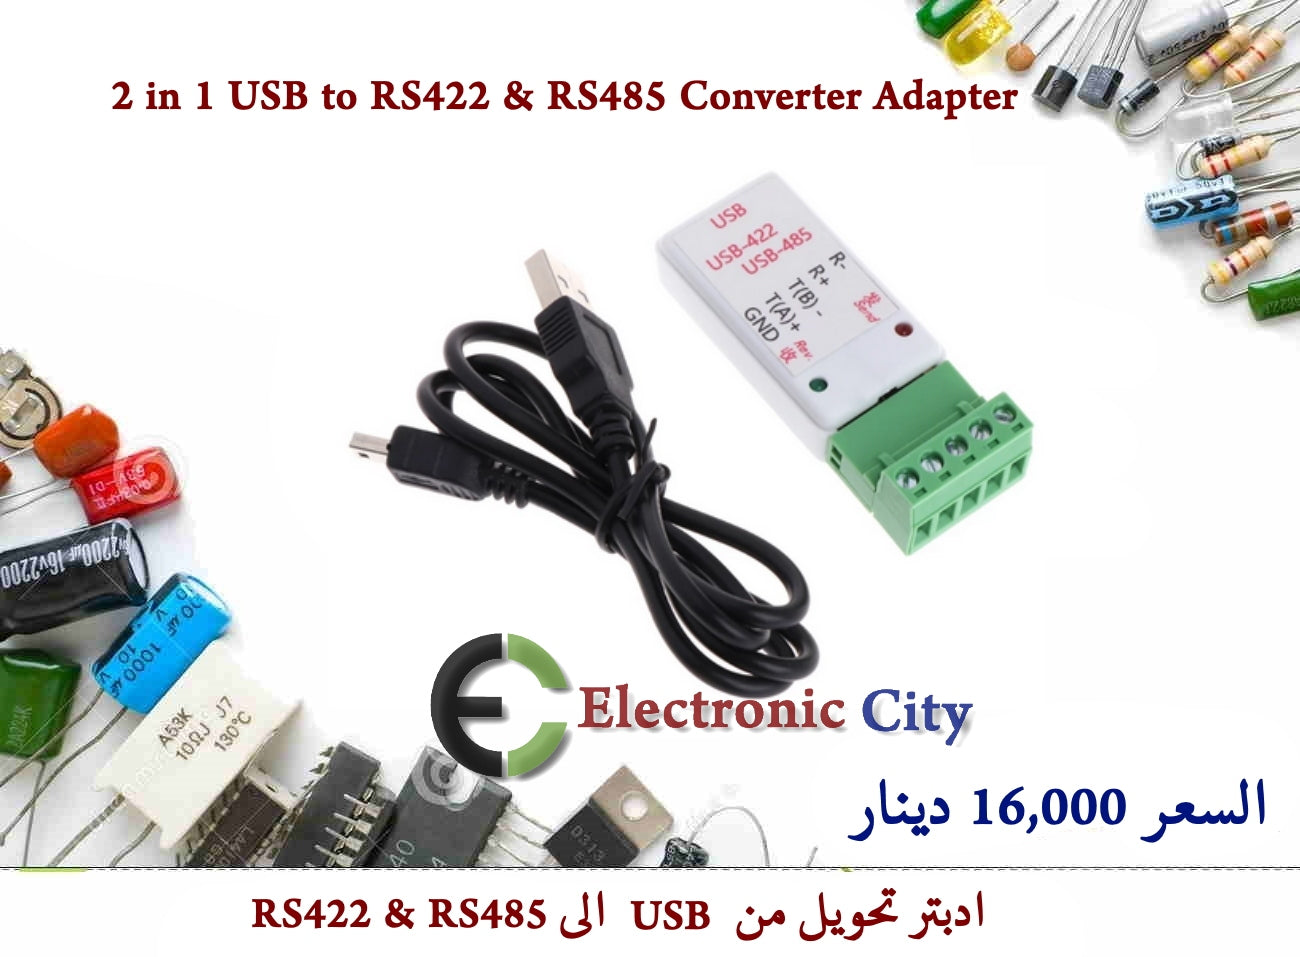 2 in 1 USB to RS422 & RS485 Converter Adapter